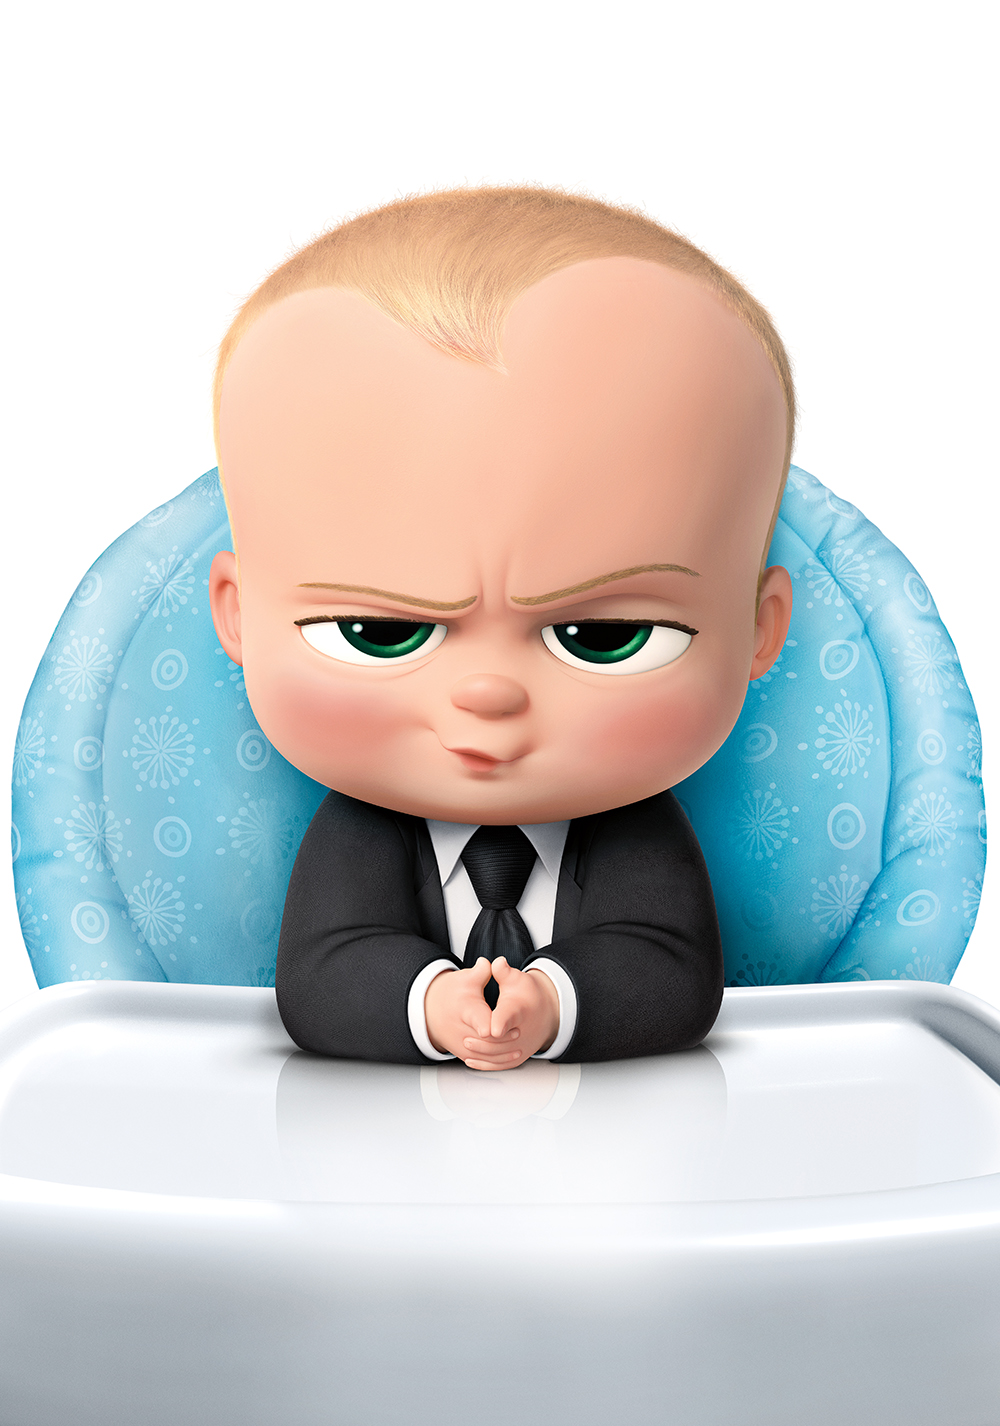 The Boss Baby Picture - Image Abyss